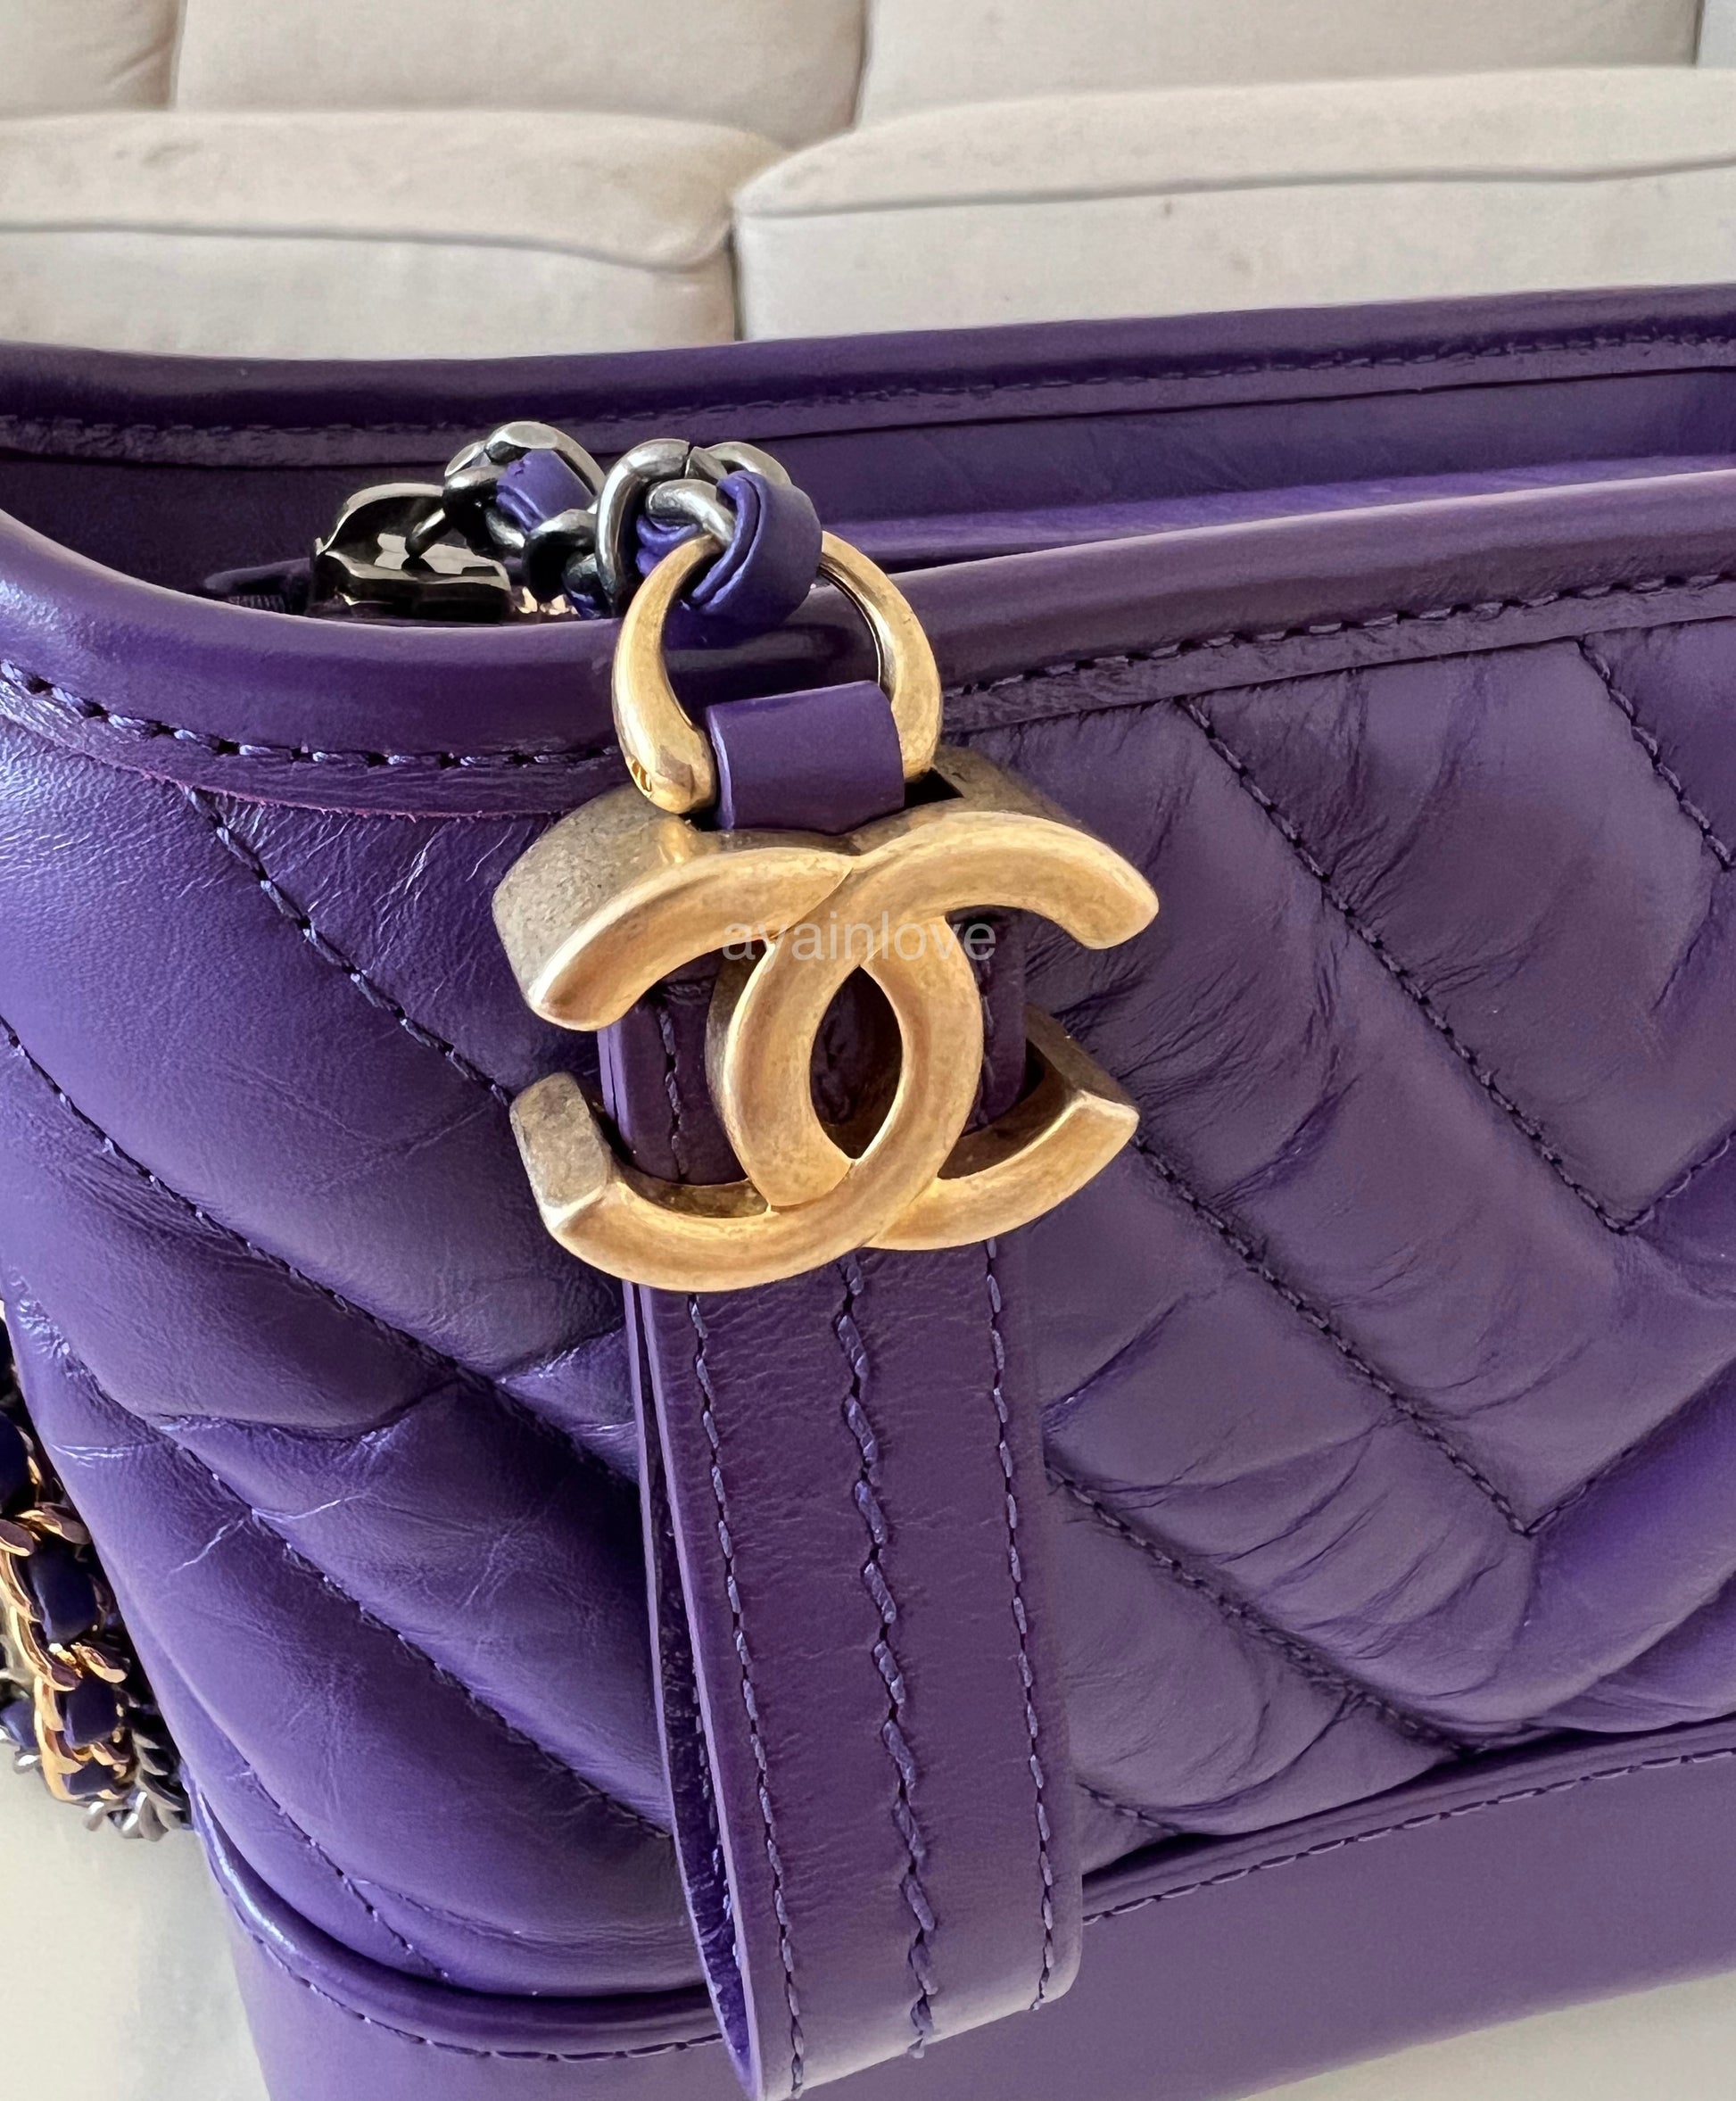 Chanel Gabrielle Hobo Shoulder Bag in Iridescent Purple with